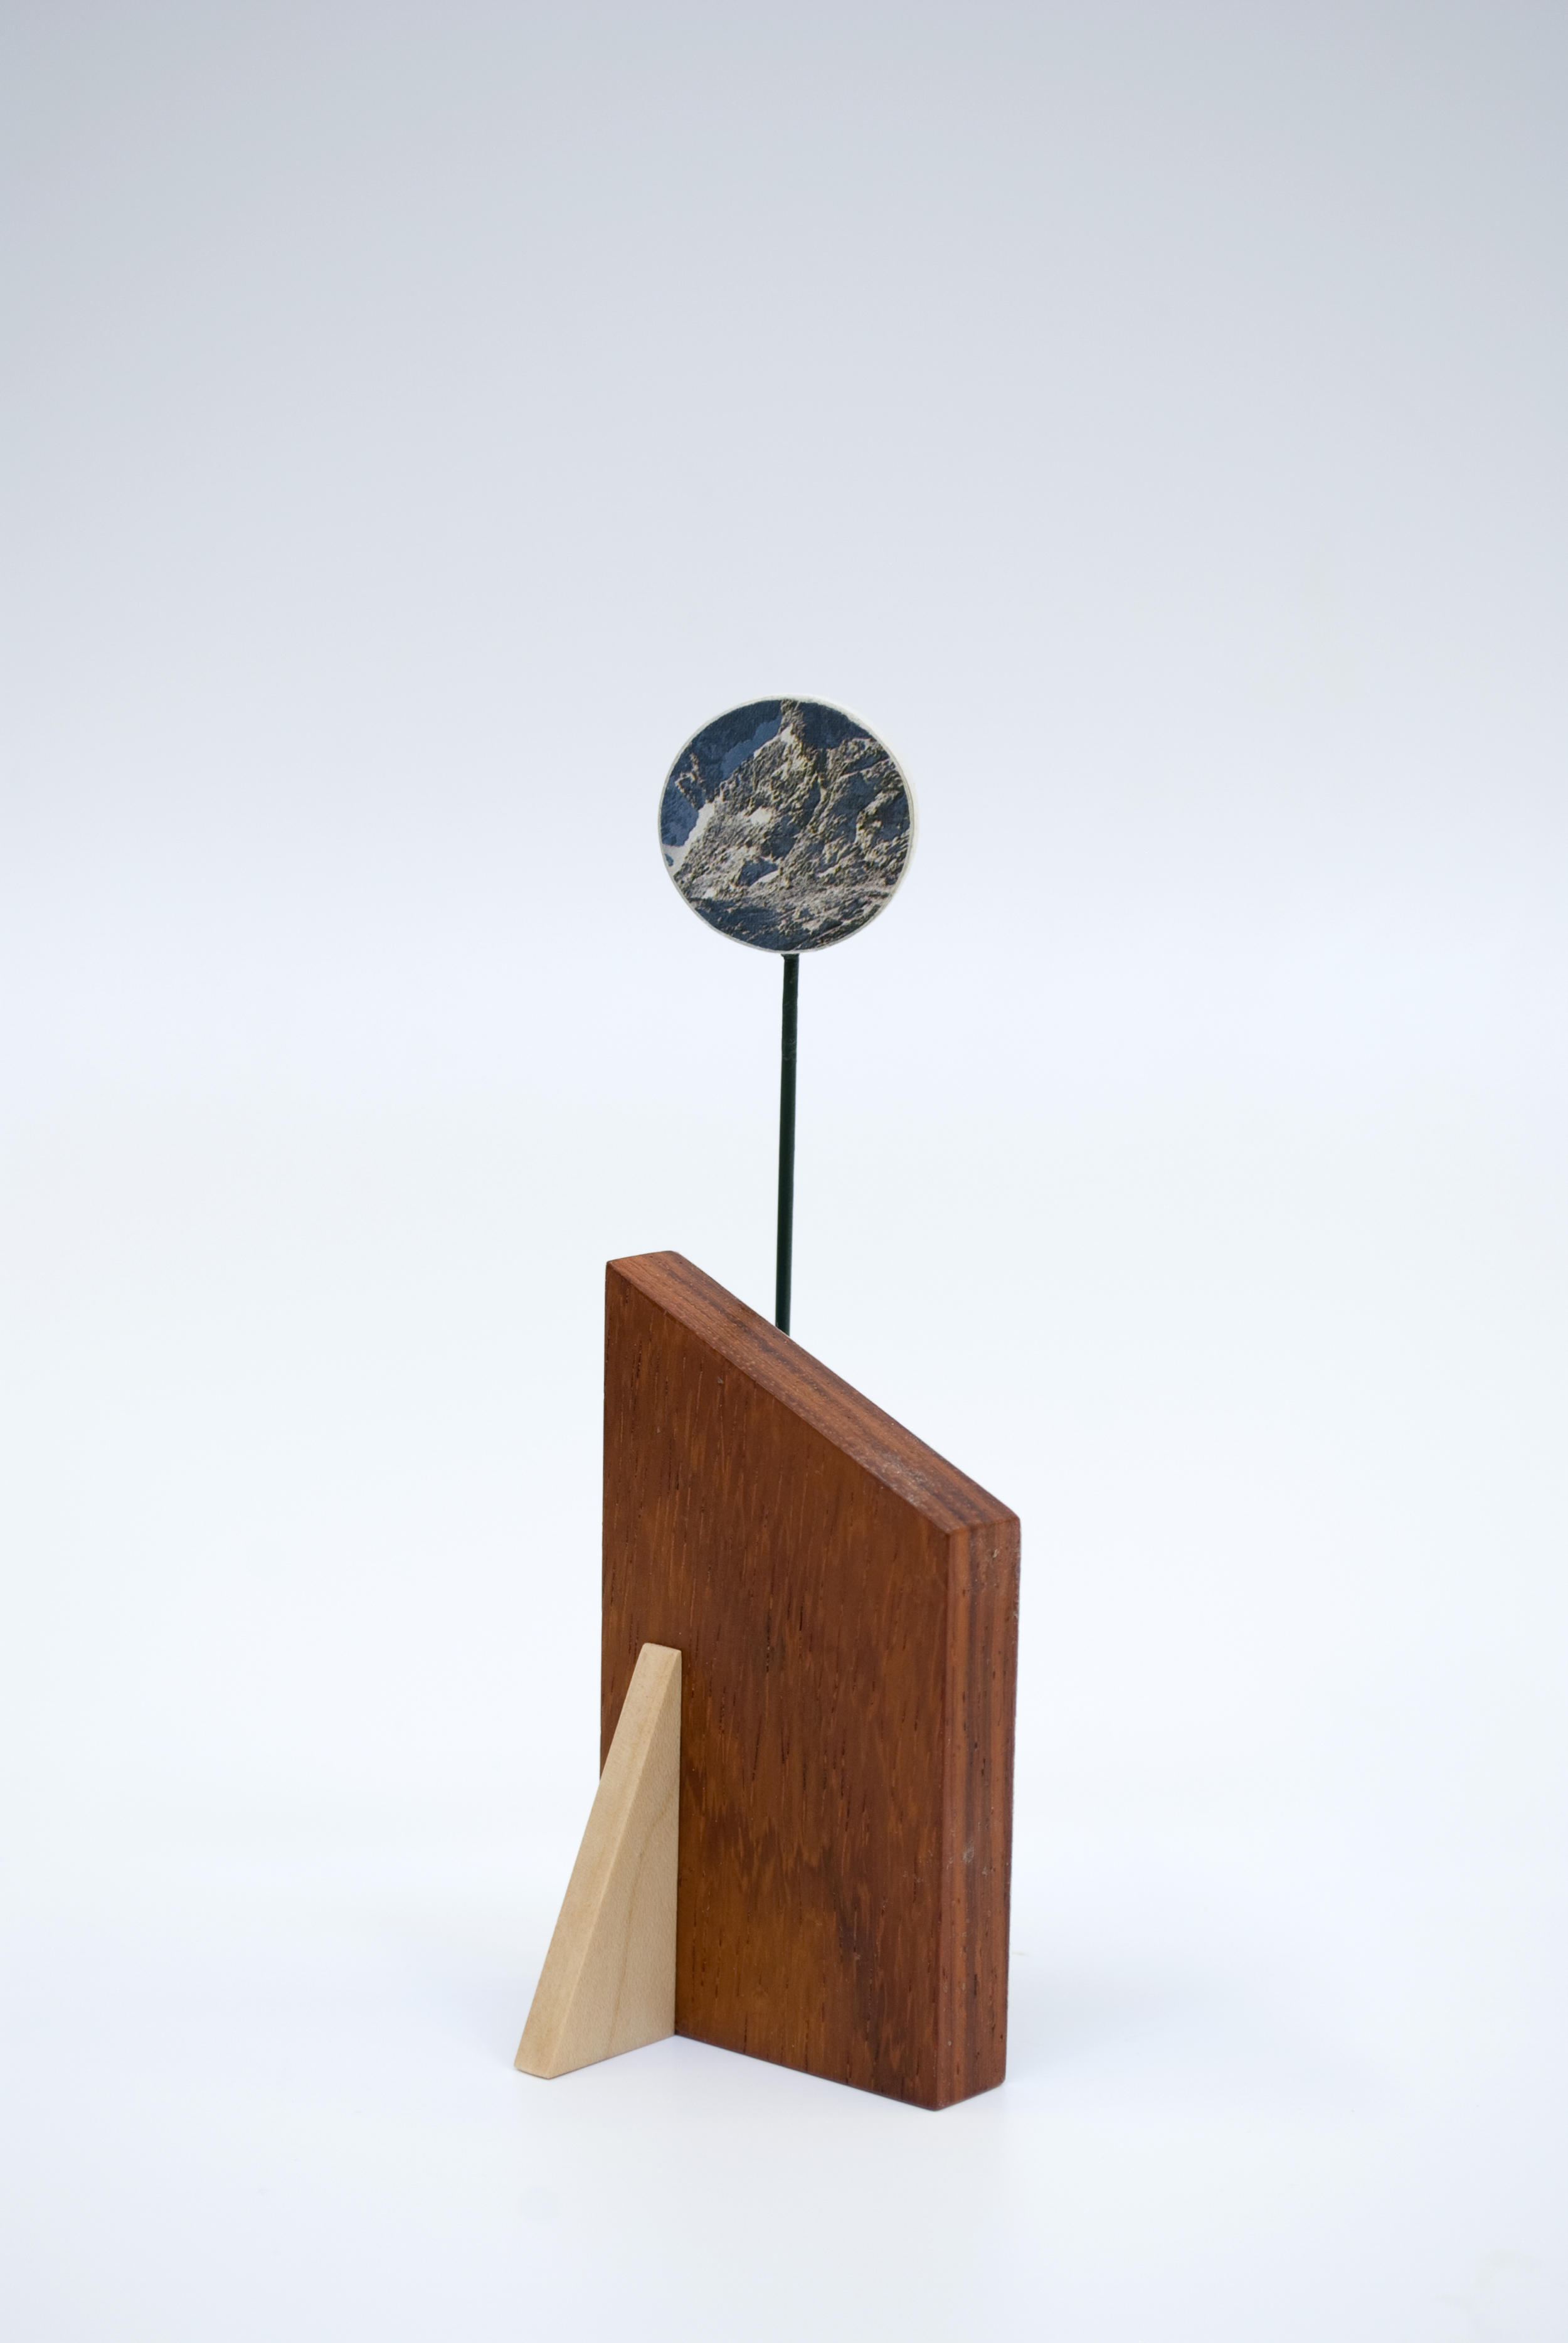   Maquette 12 , 2015  5 x 2 x 1.5 inches  Wood, paint, found image 